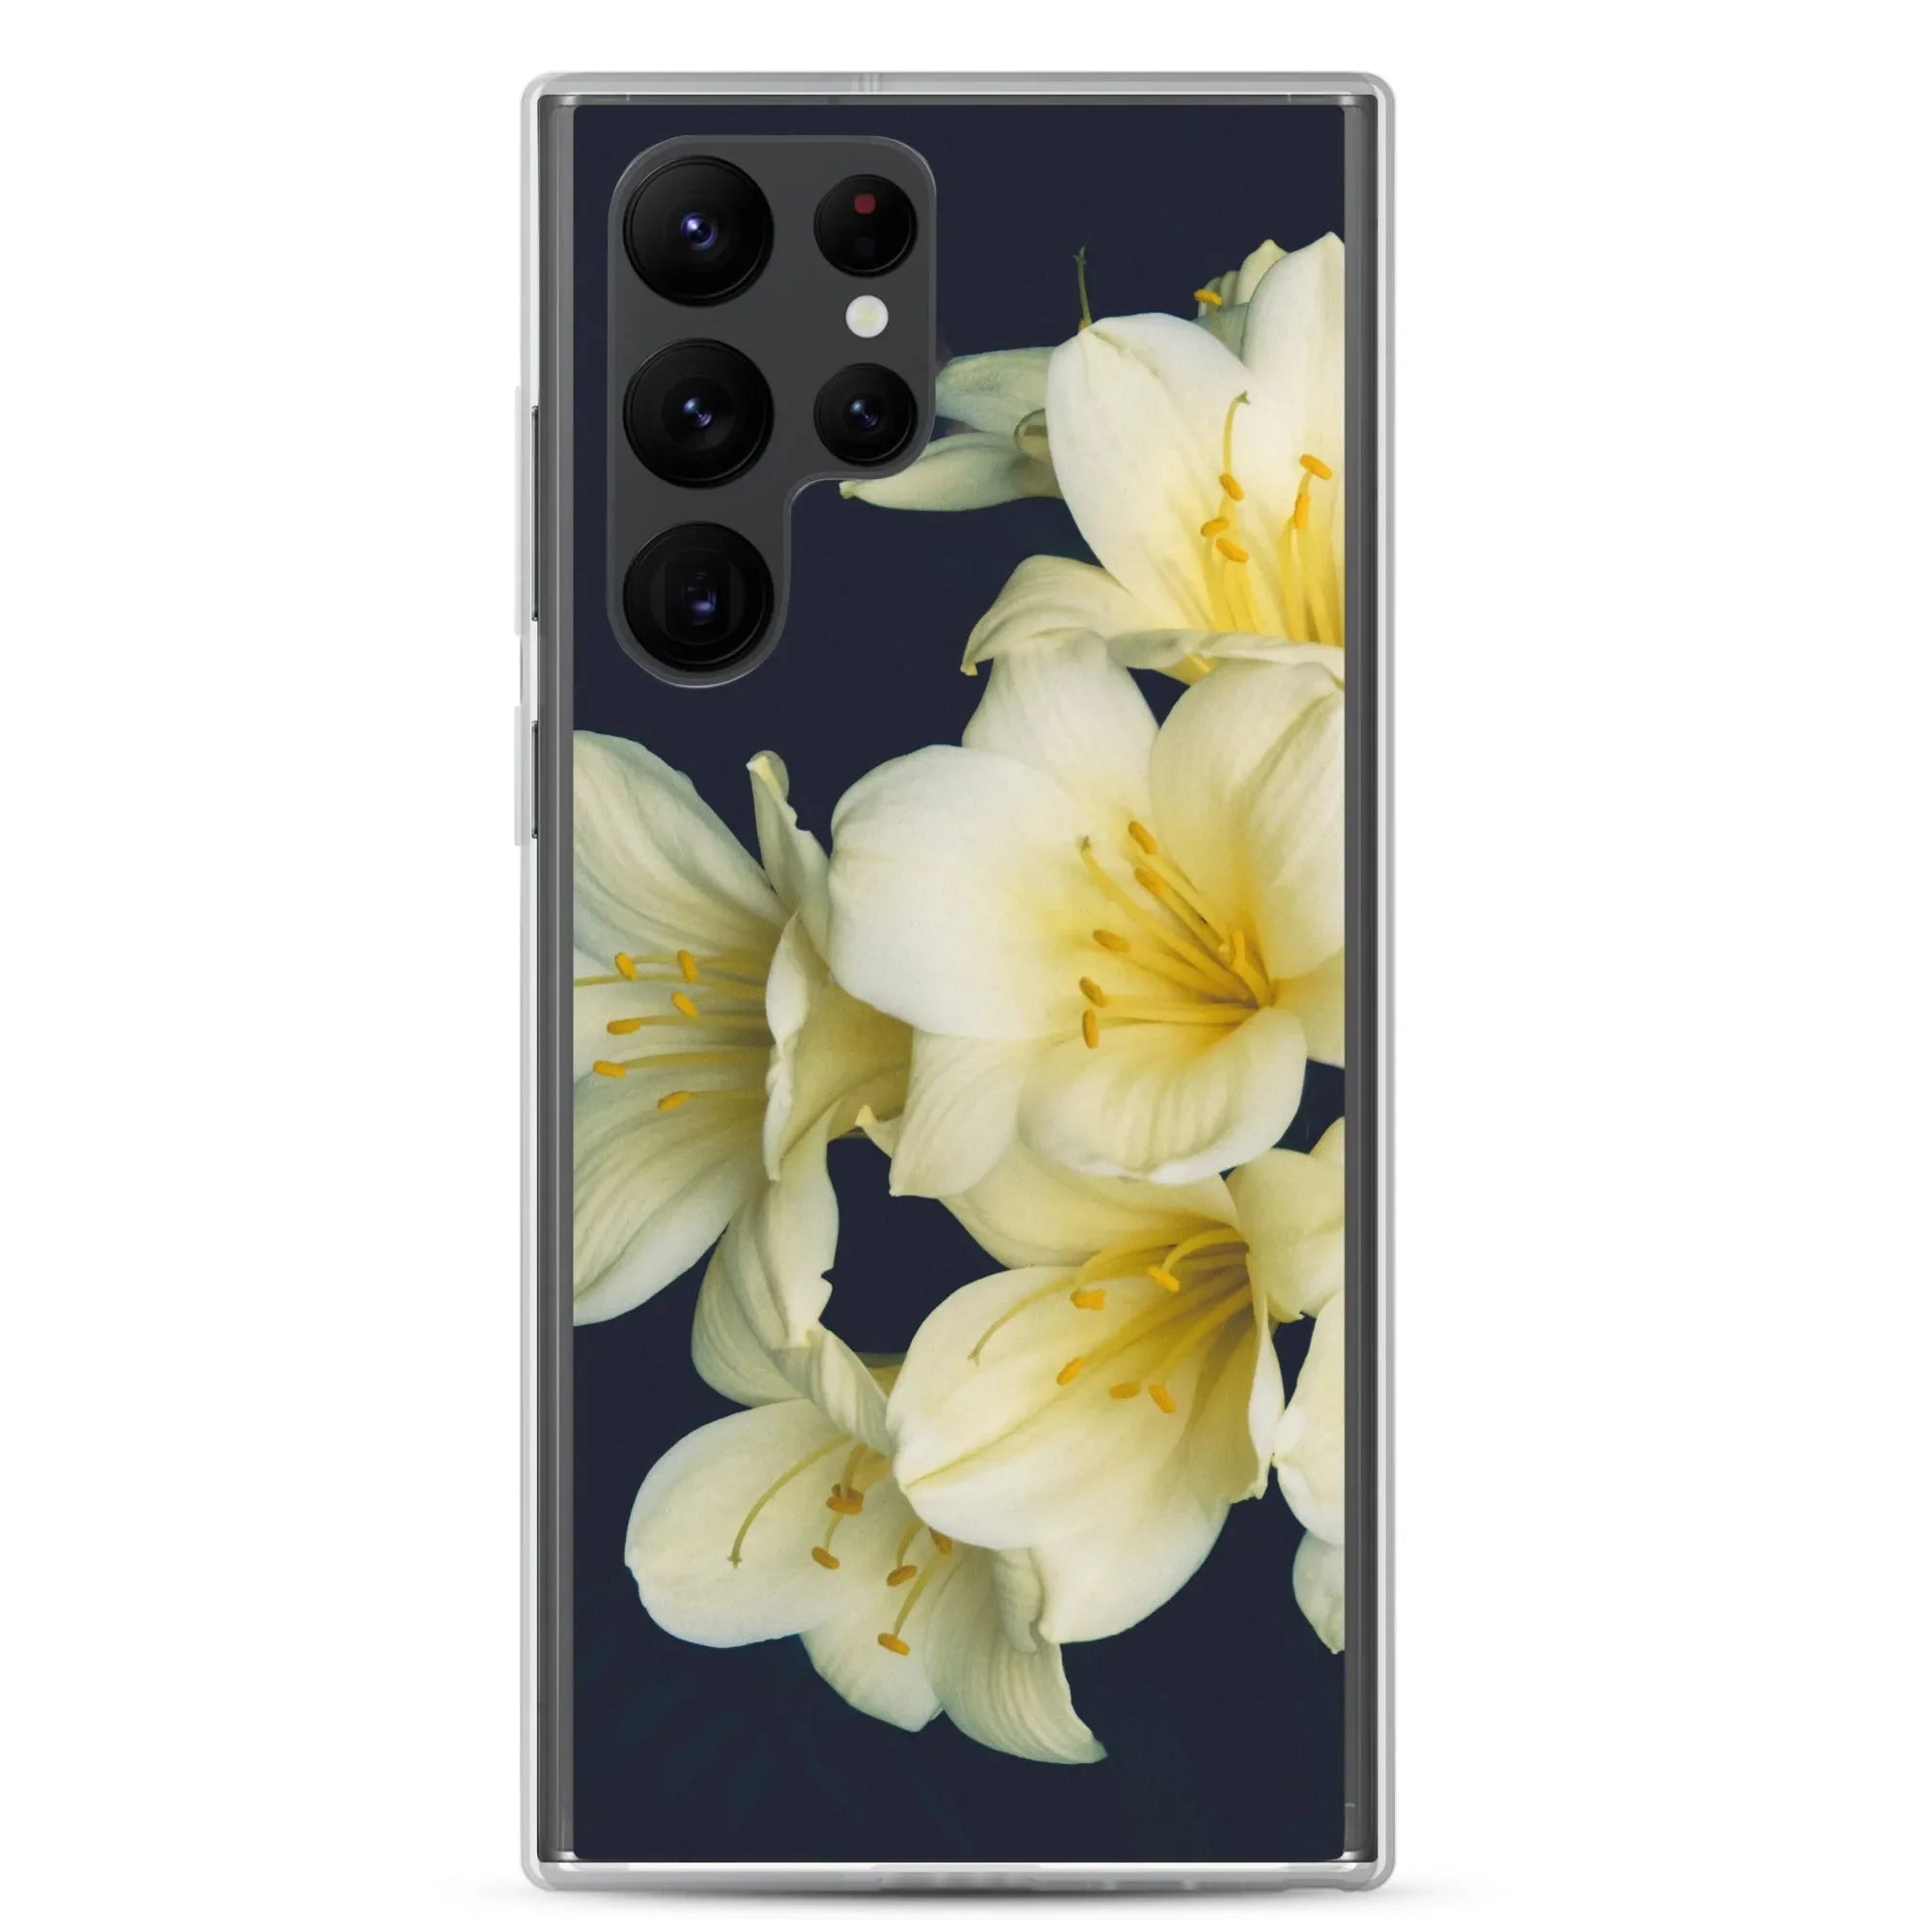 Flower Power 2 + Too Samsung Galaxy Case - Samsung Galaxy S22 Ultra - Mobile Phone Cases - Aesthetic Art